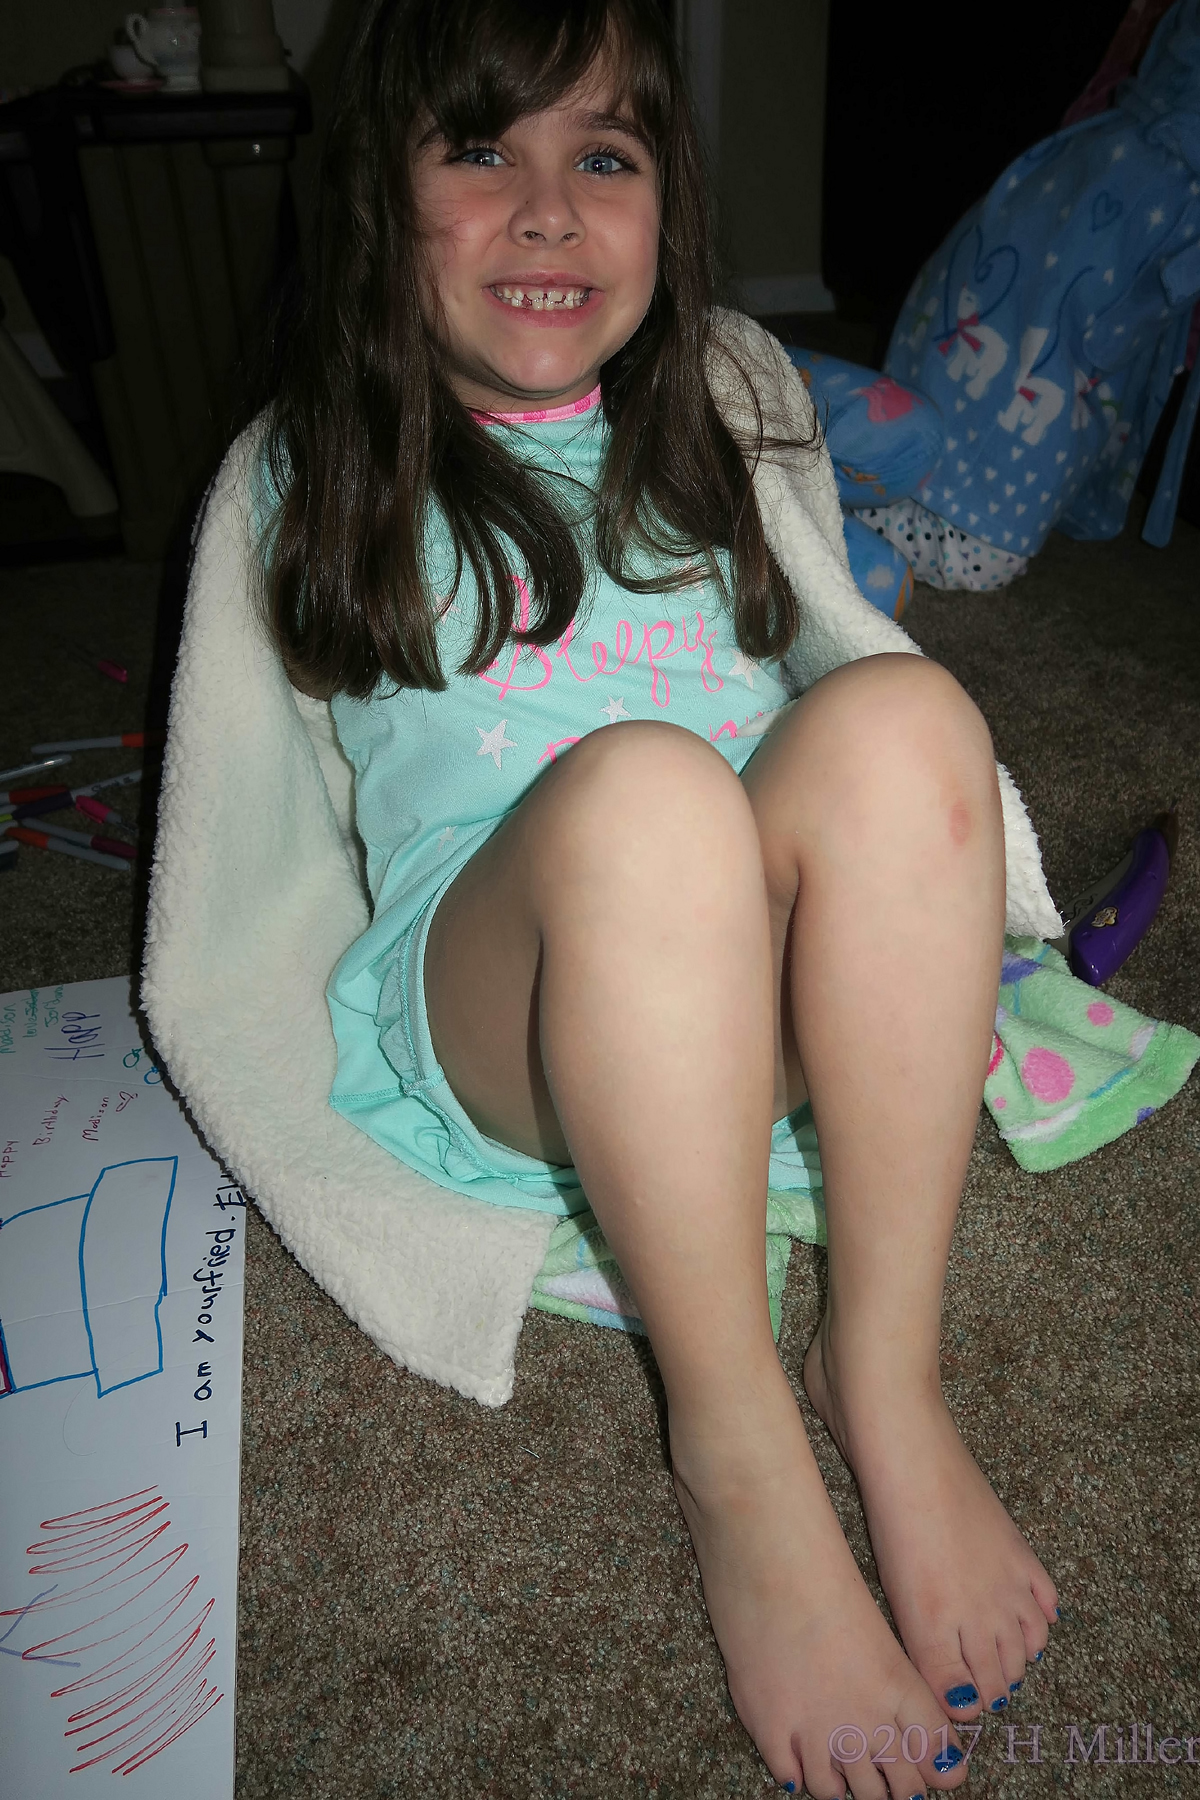 Children's Mini Pedicures, That's Fun And Exciting! 1